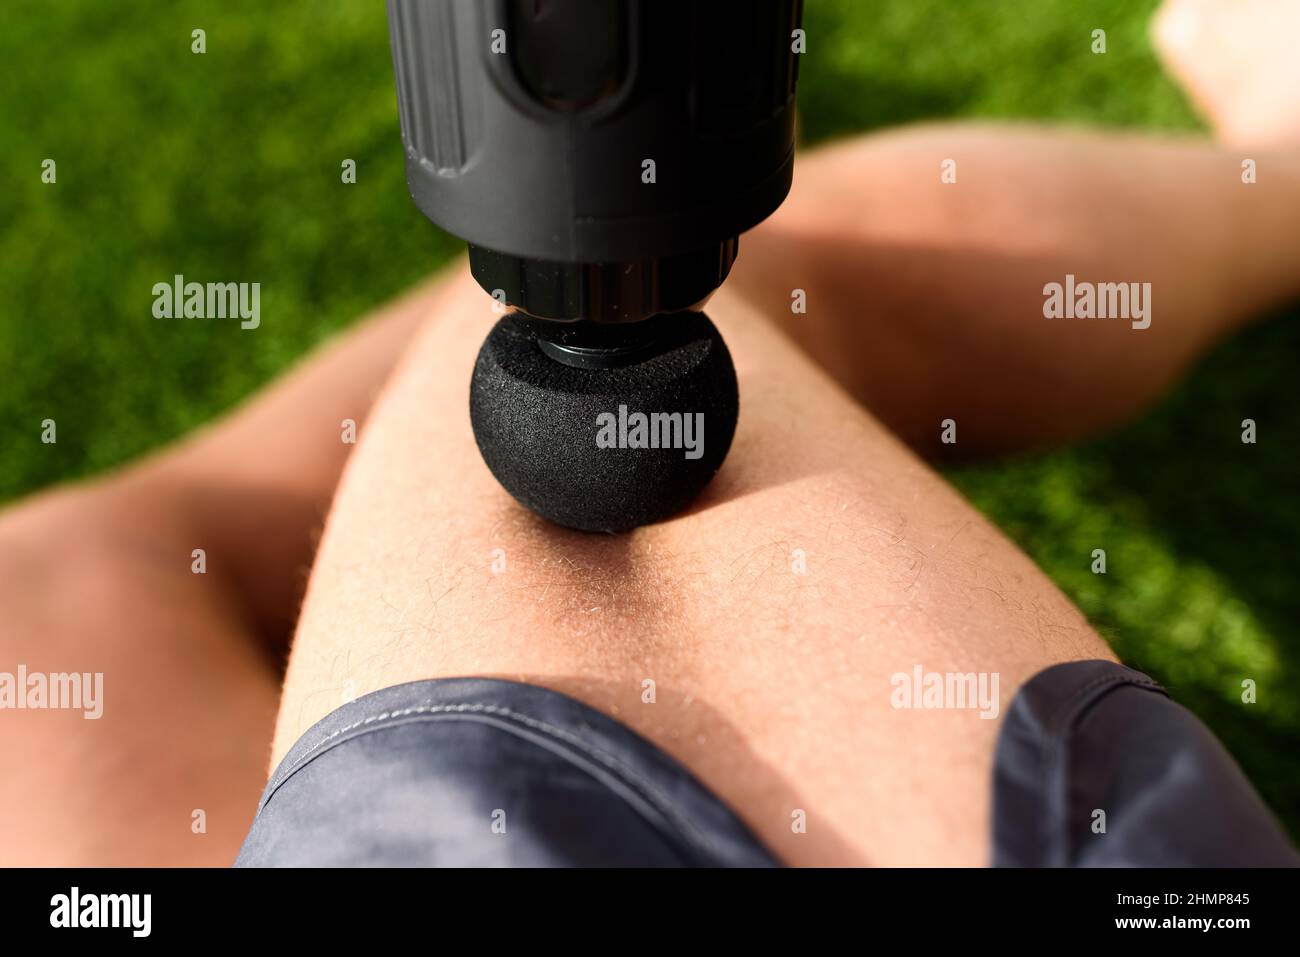 Athlete receives a massage with a percussion gun to relieve pain from muscle soreness in his legs. Stock Photo